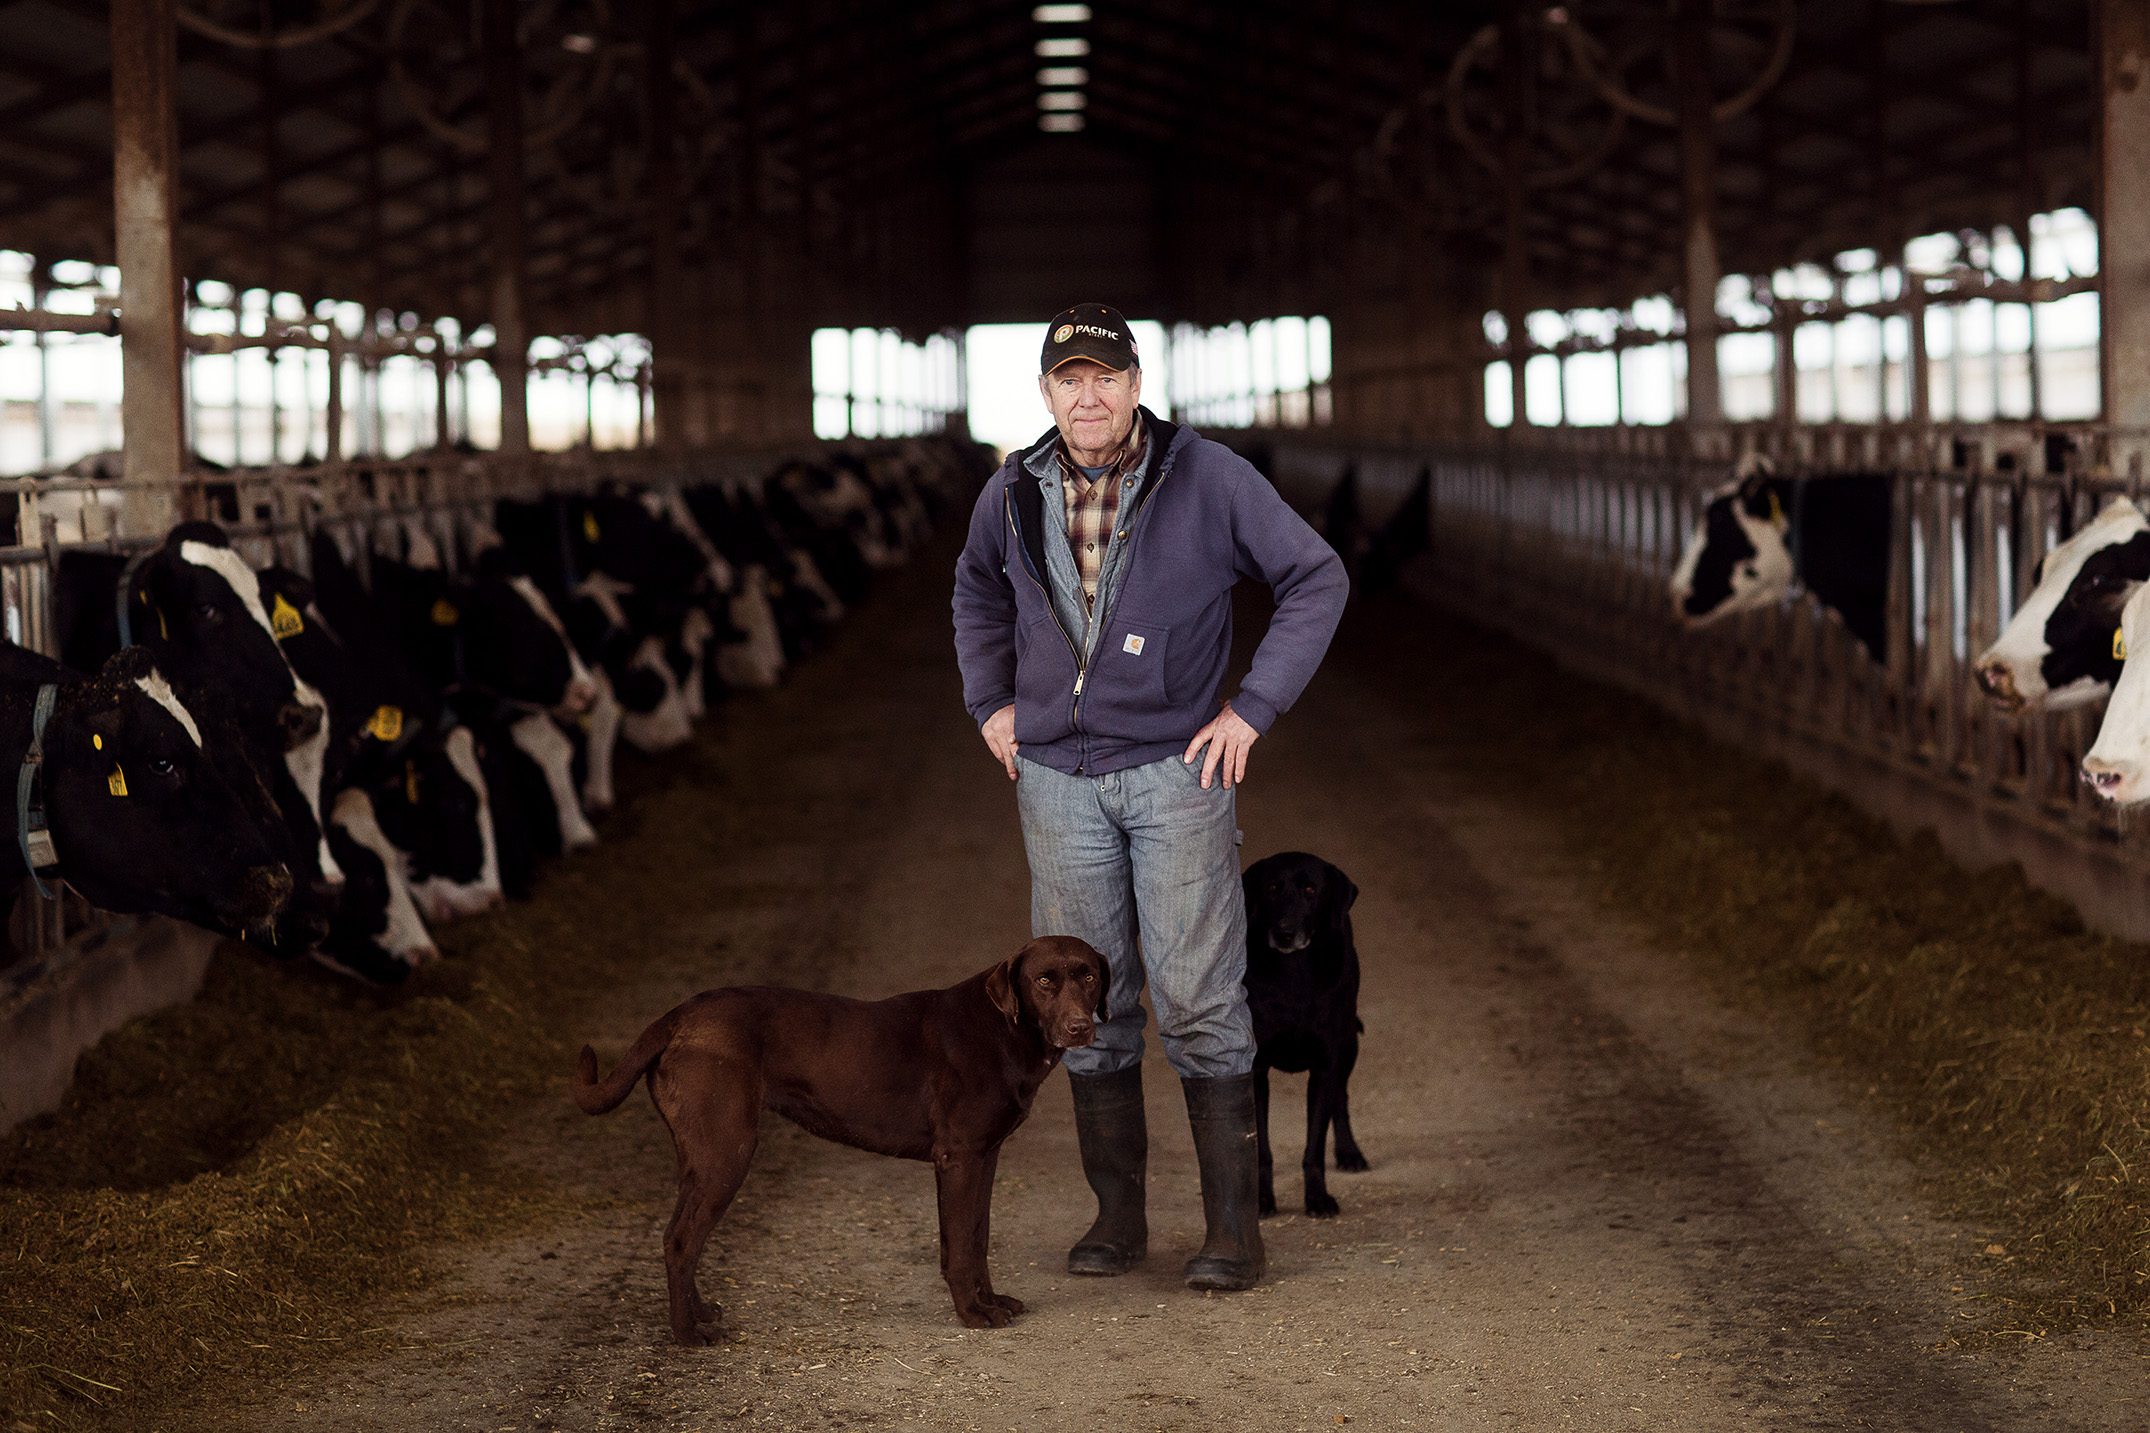 Mike Kane | Dairy farmer in Eastern Washington | Seattle documentary, editorial, and commercial photography